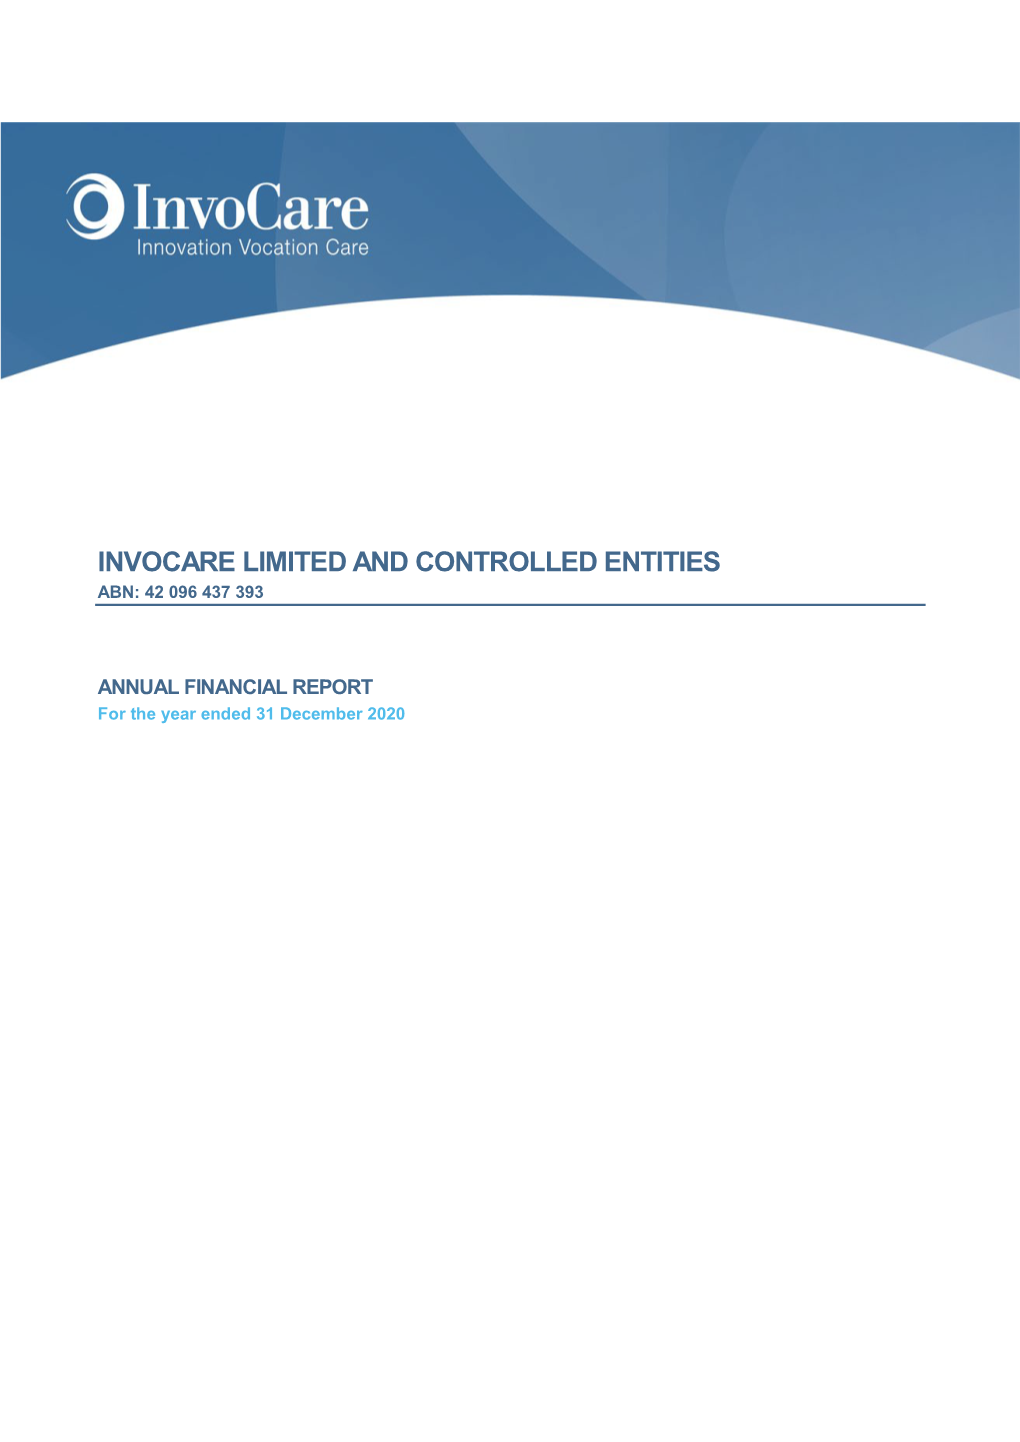 Invocare Limited and Controlled Entities Abn: 42 096 437 393